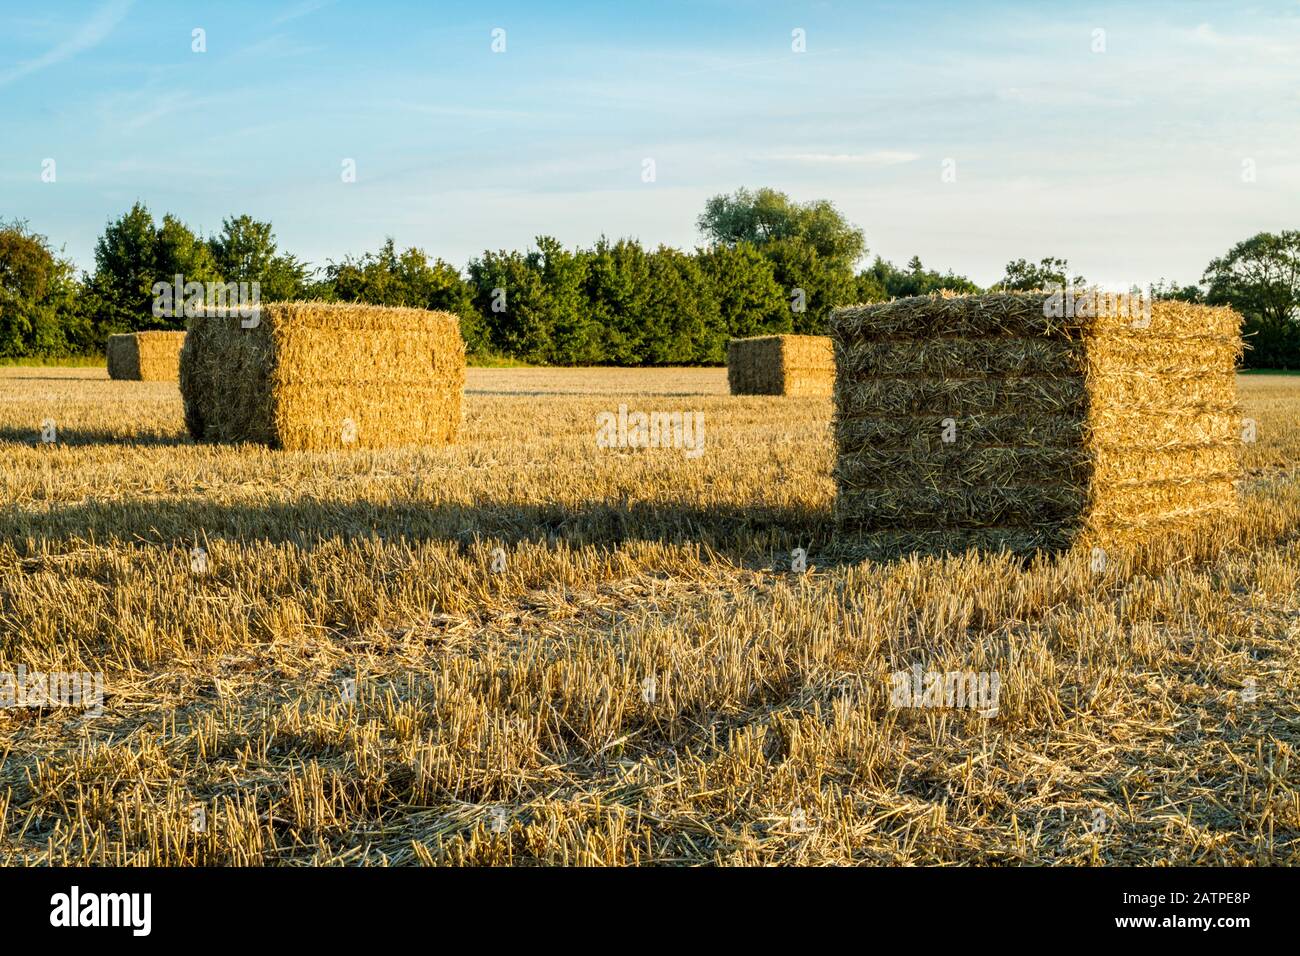 Harvest time. Straw bales in a field awaiting collection in a harvested field, Nottinghamshire, England, UK Stock Photo